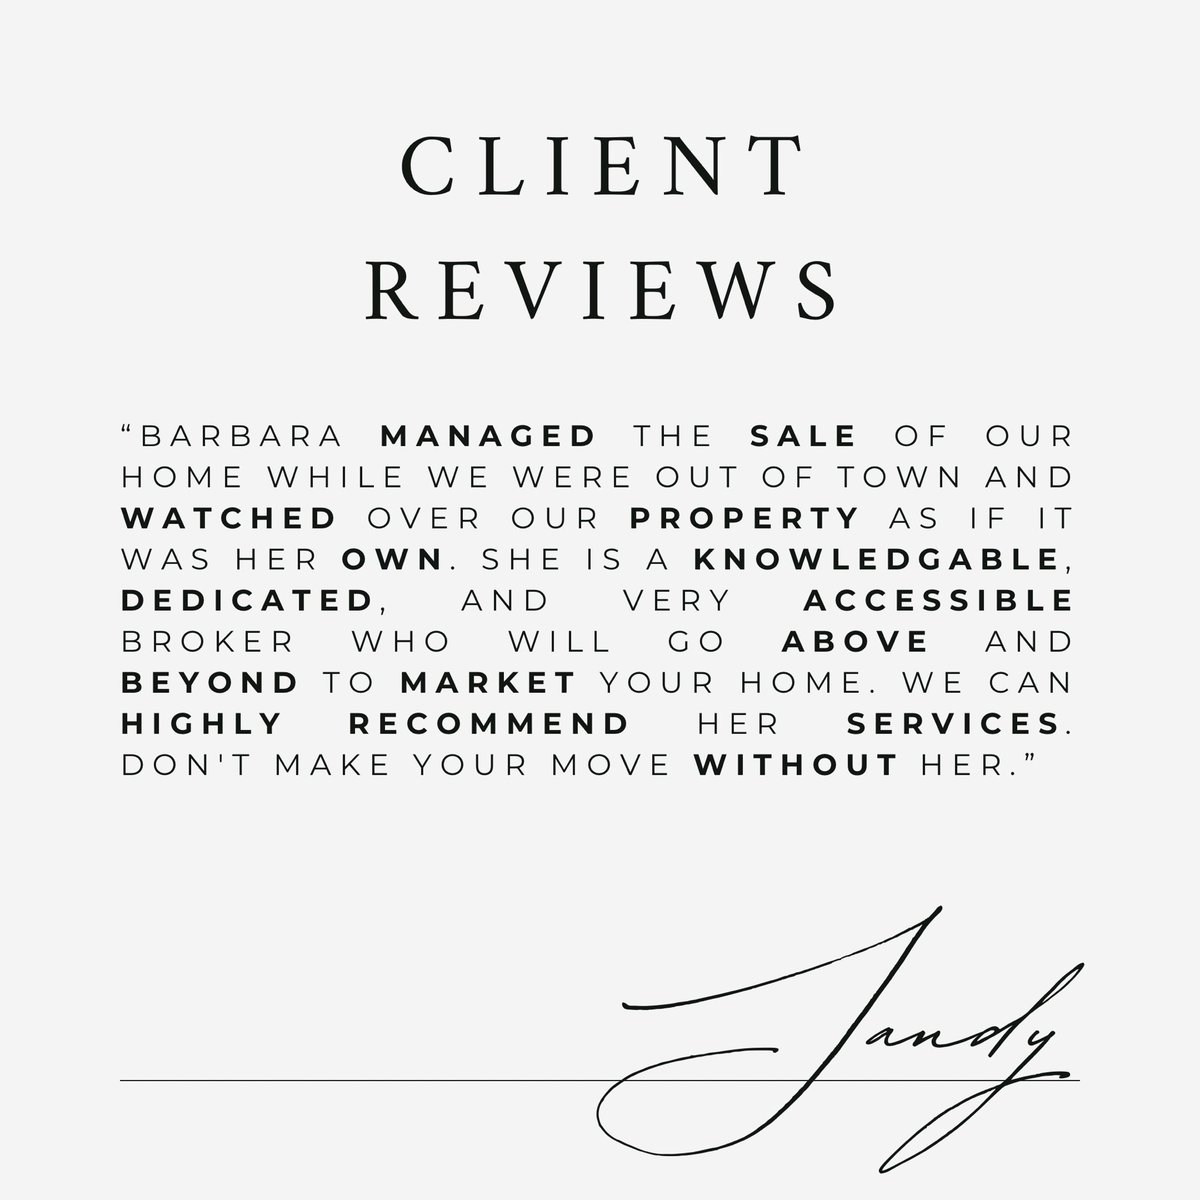 What a way to start off the month! 📝 #ClientReviews 🌟🌟🌟🌟🌟

➡️ zillow.com/profile/Barbar…
.
.
.
.
#SoldByBarbara #CallBarbara #ILoveWhatIDo #ListenToYourBroker #ListWithMe #BuyWithMe #DouglasElliman #DouglasEllimanRealEstate #DE #EllimanAgents #EllimanLI #LongIsland